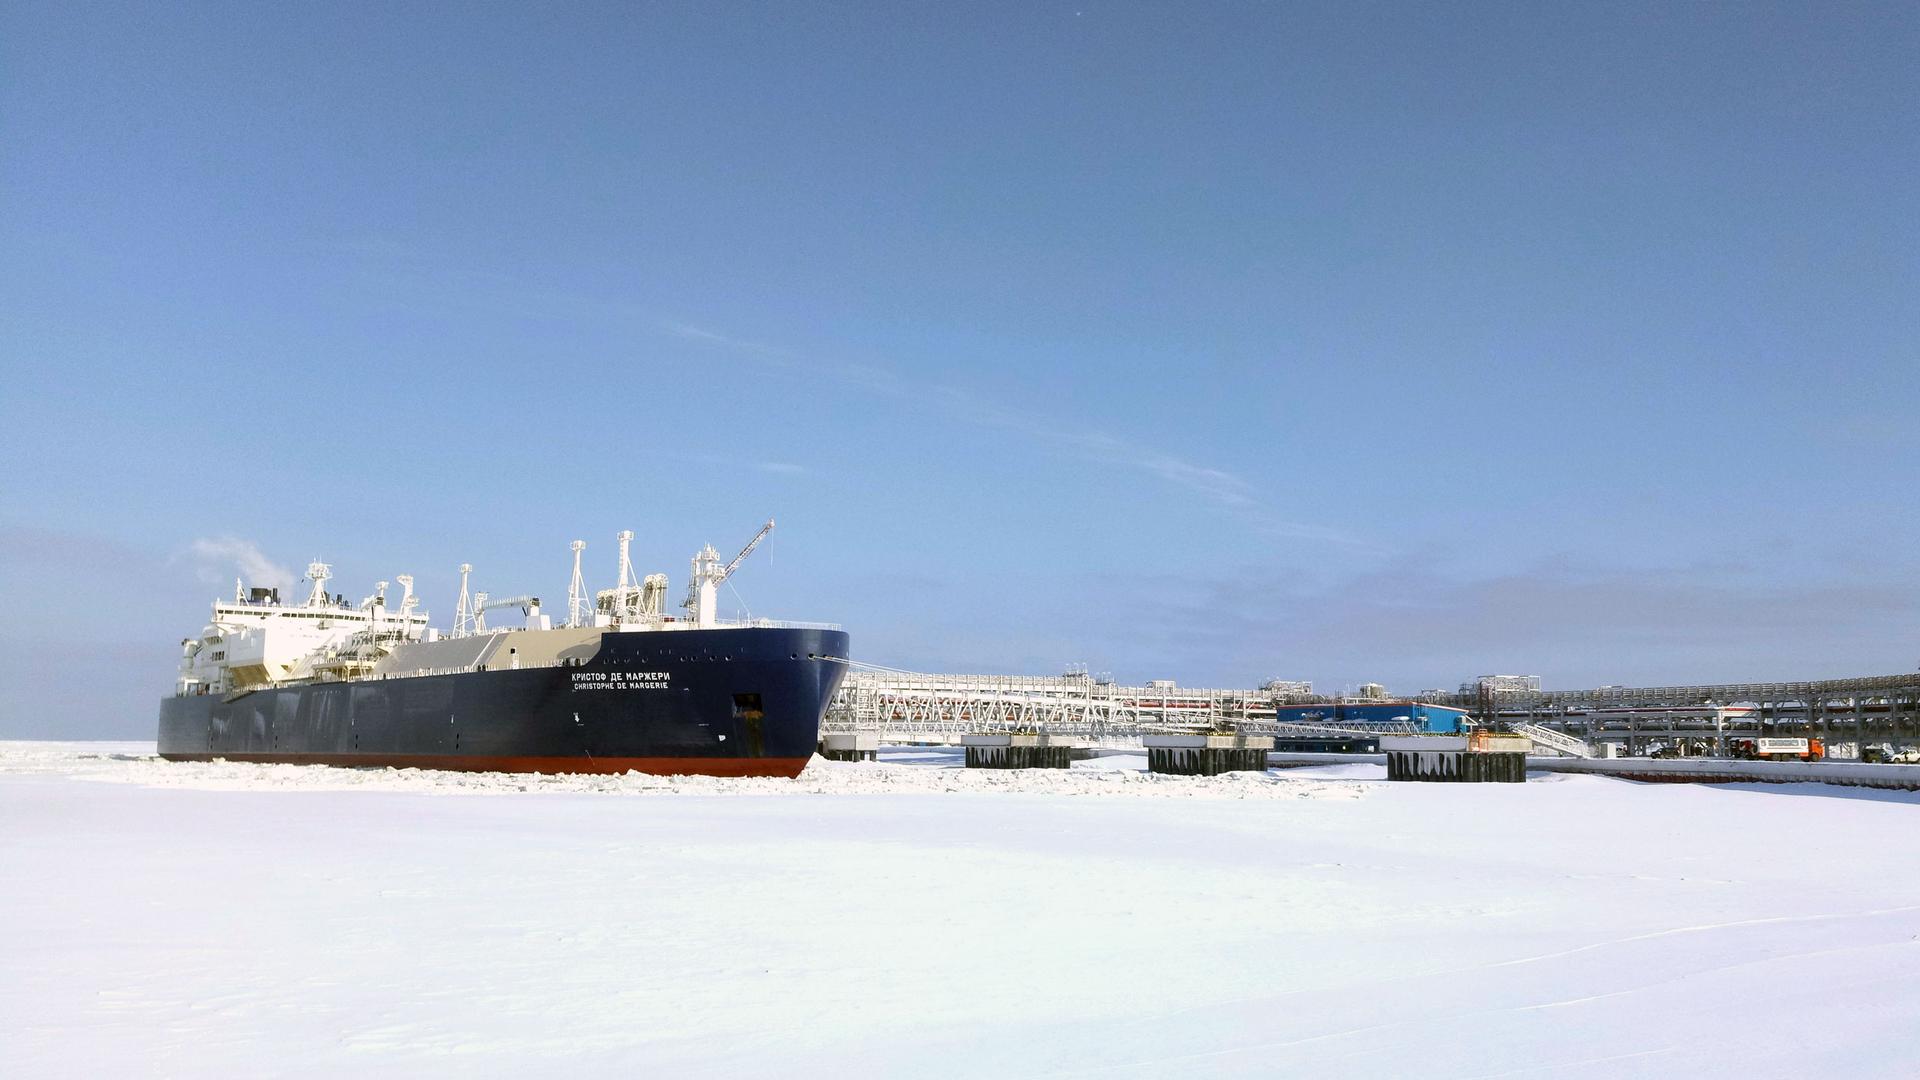 A large oil tanker docks amid ice and snow in the Arctic. On the side, the ship's name is written in Russian characters.